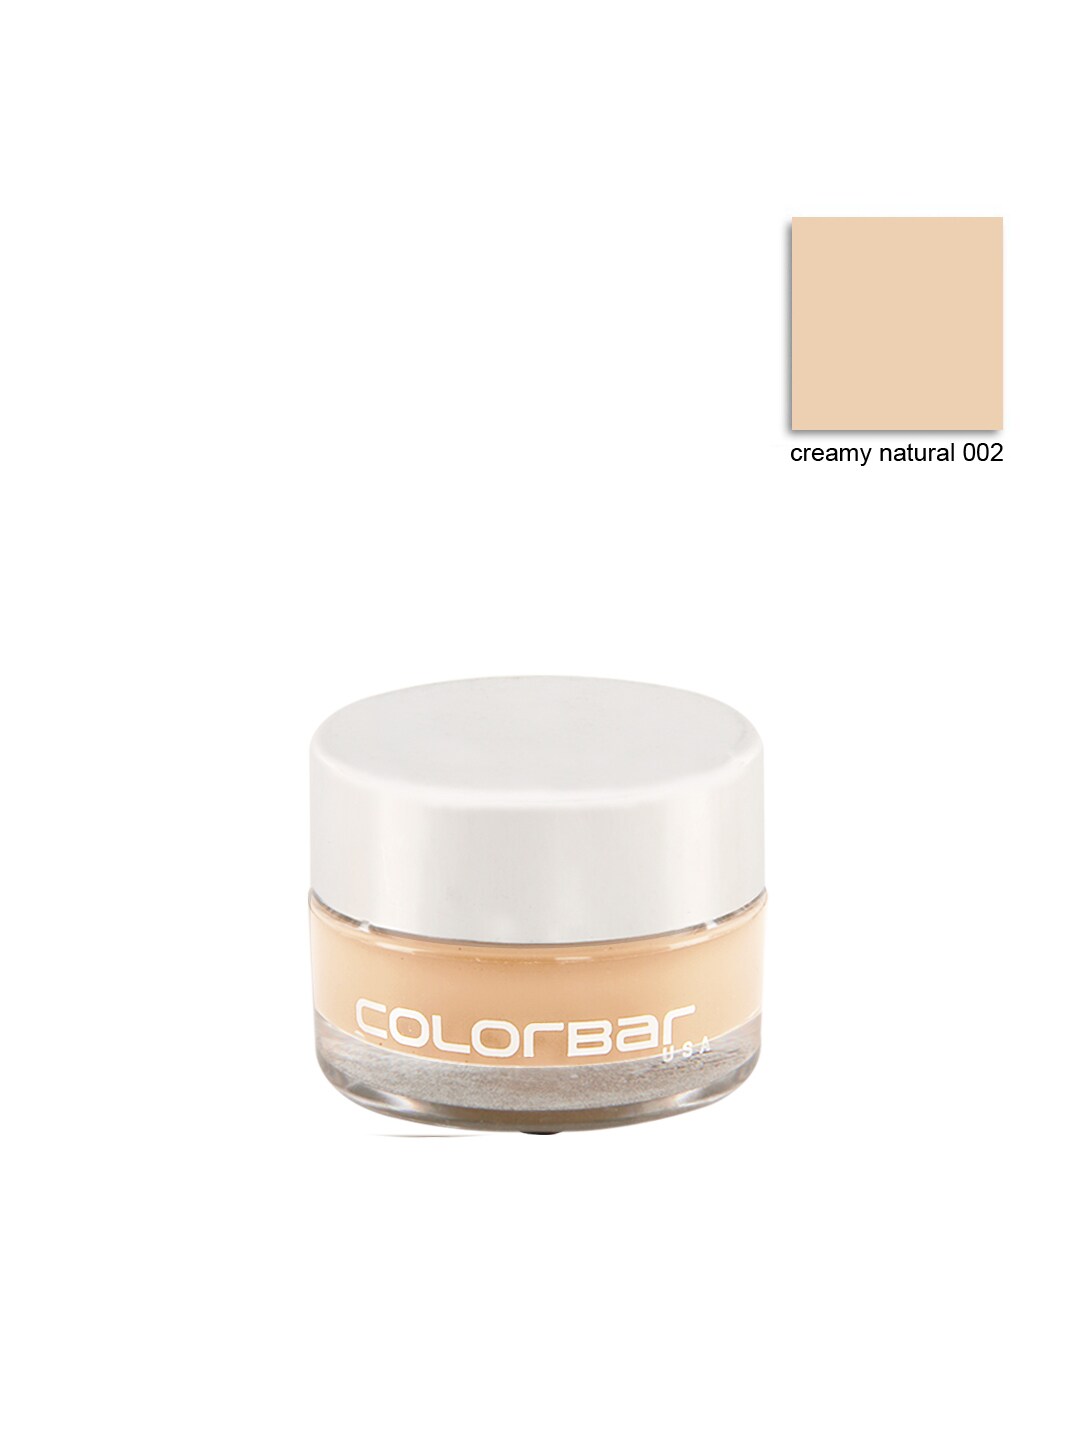 Colorbar Full Cover Creamy Natural Concealer 002